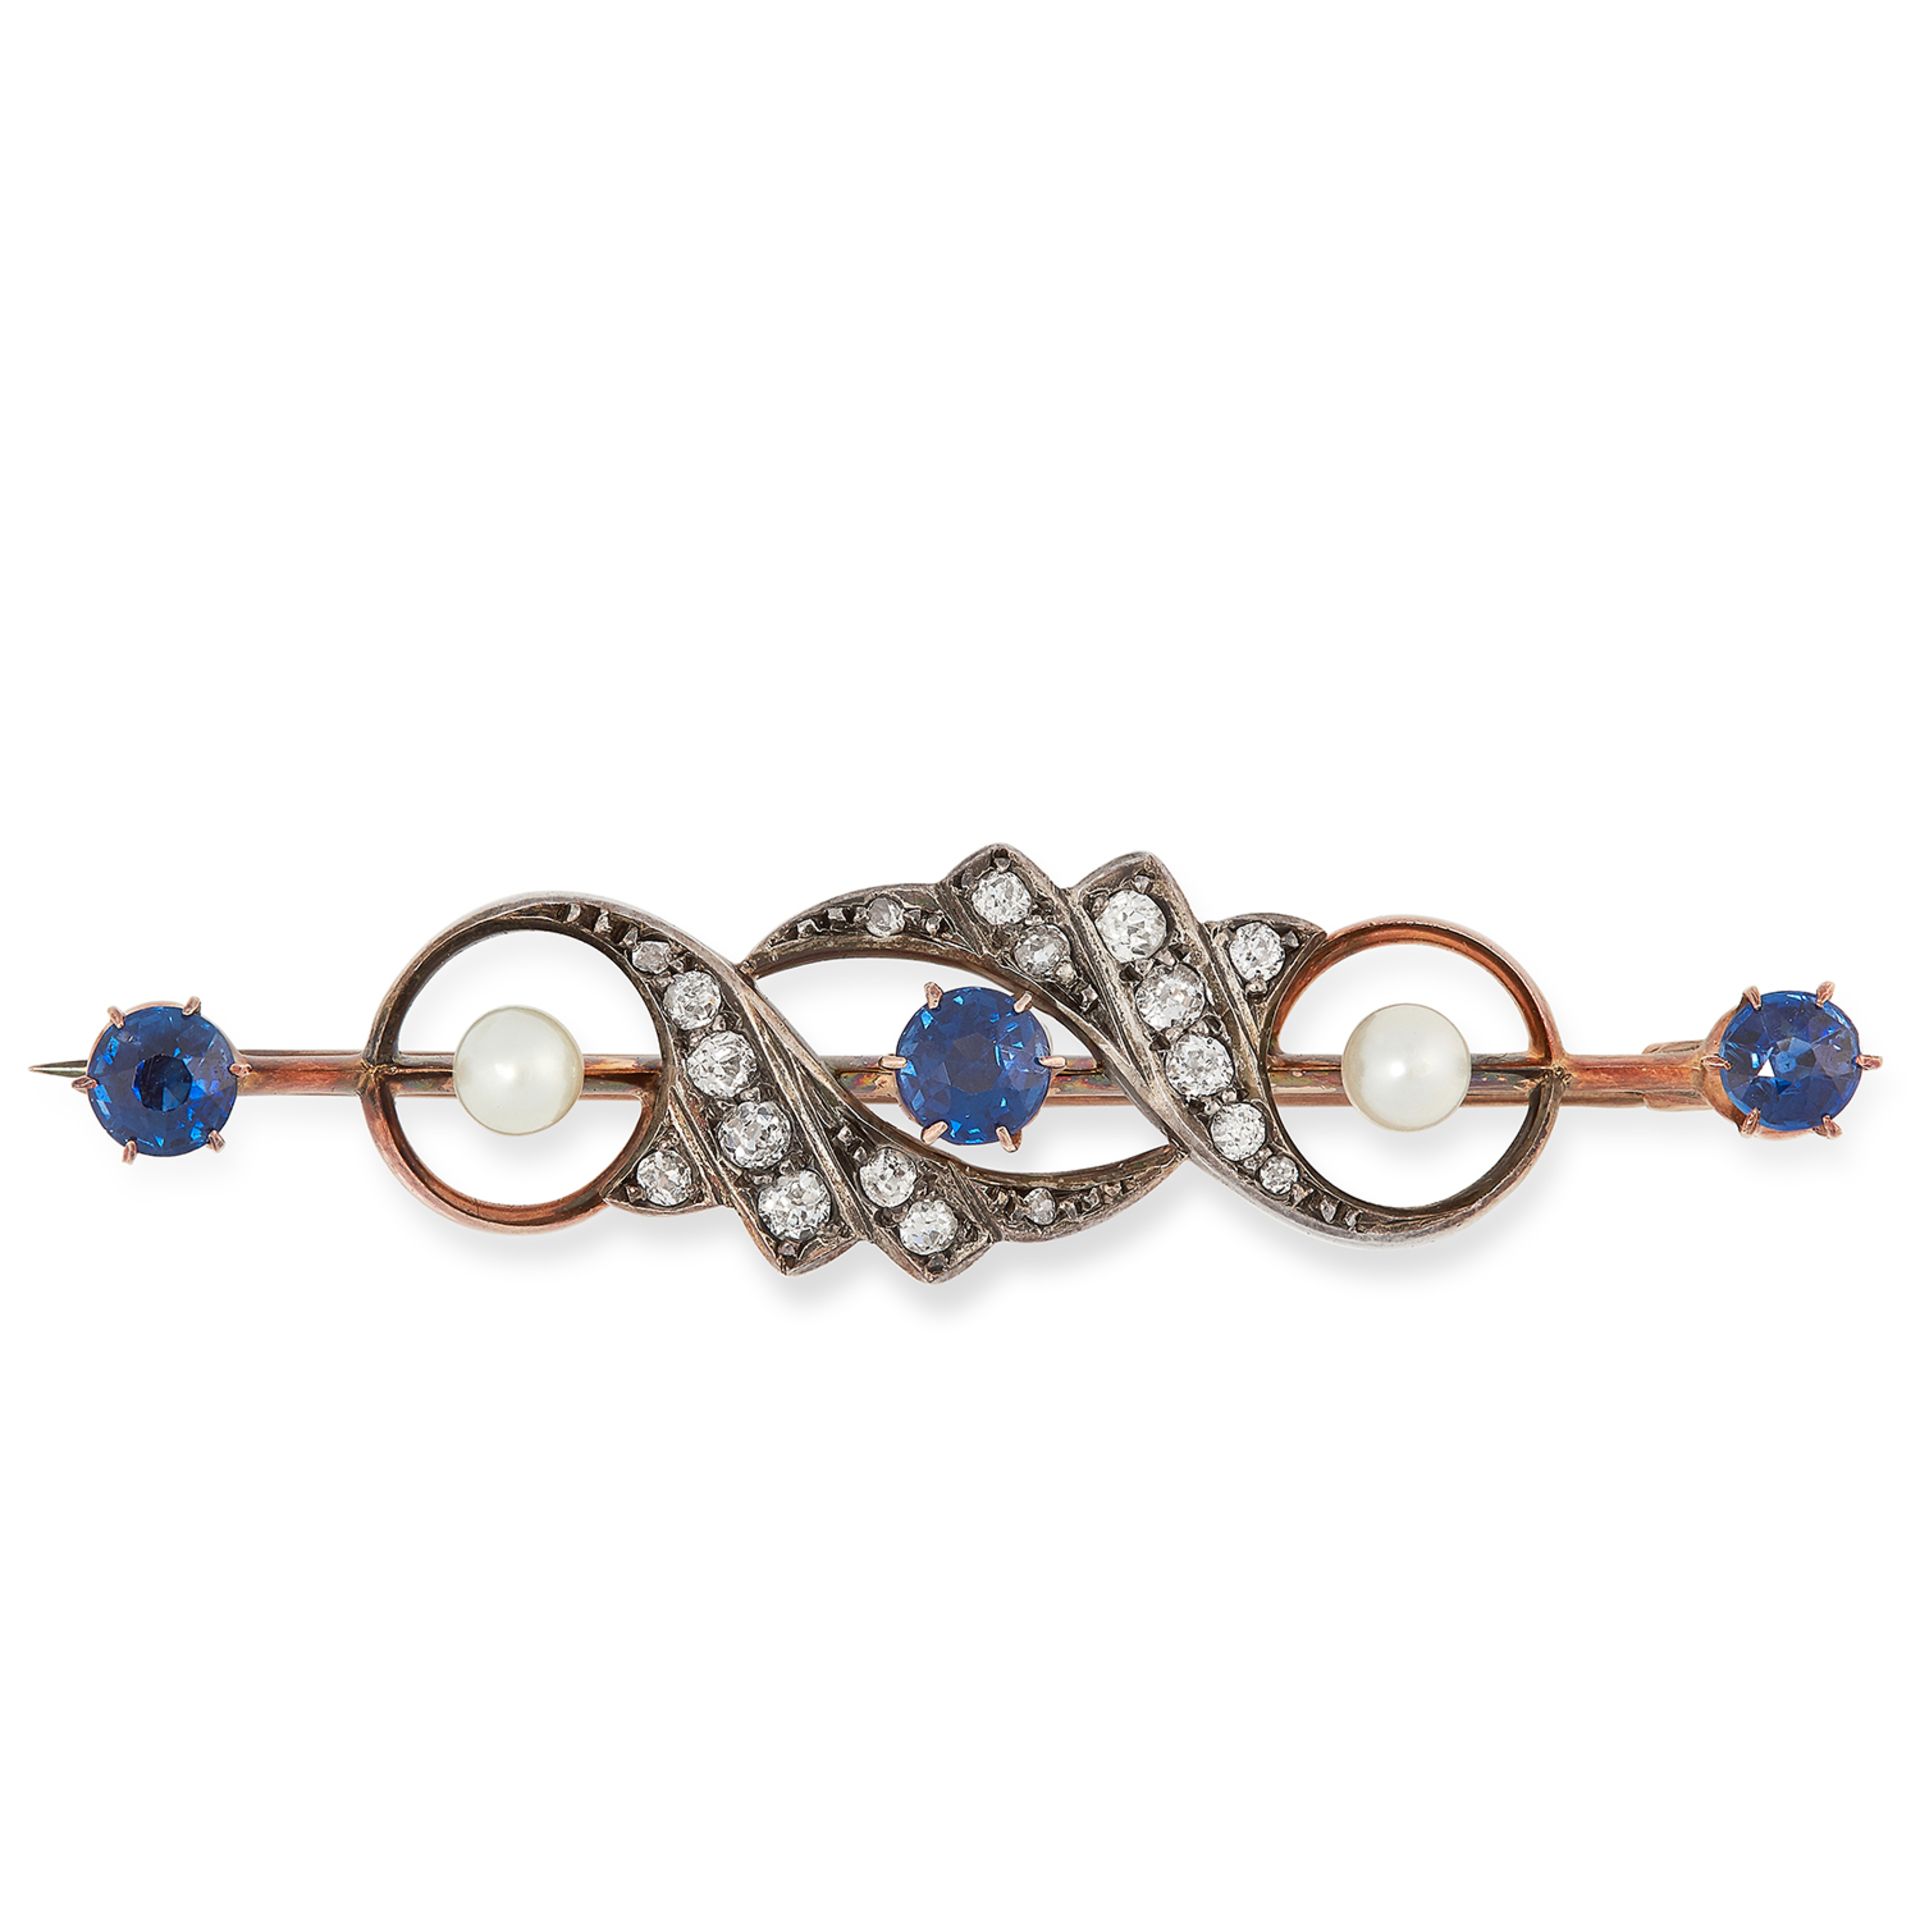 ANTIQUE SAPPHIRE, DIAMOND AND PEARL BROOCH set with three round cut sapphires, old cut diamonds